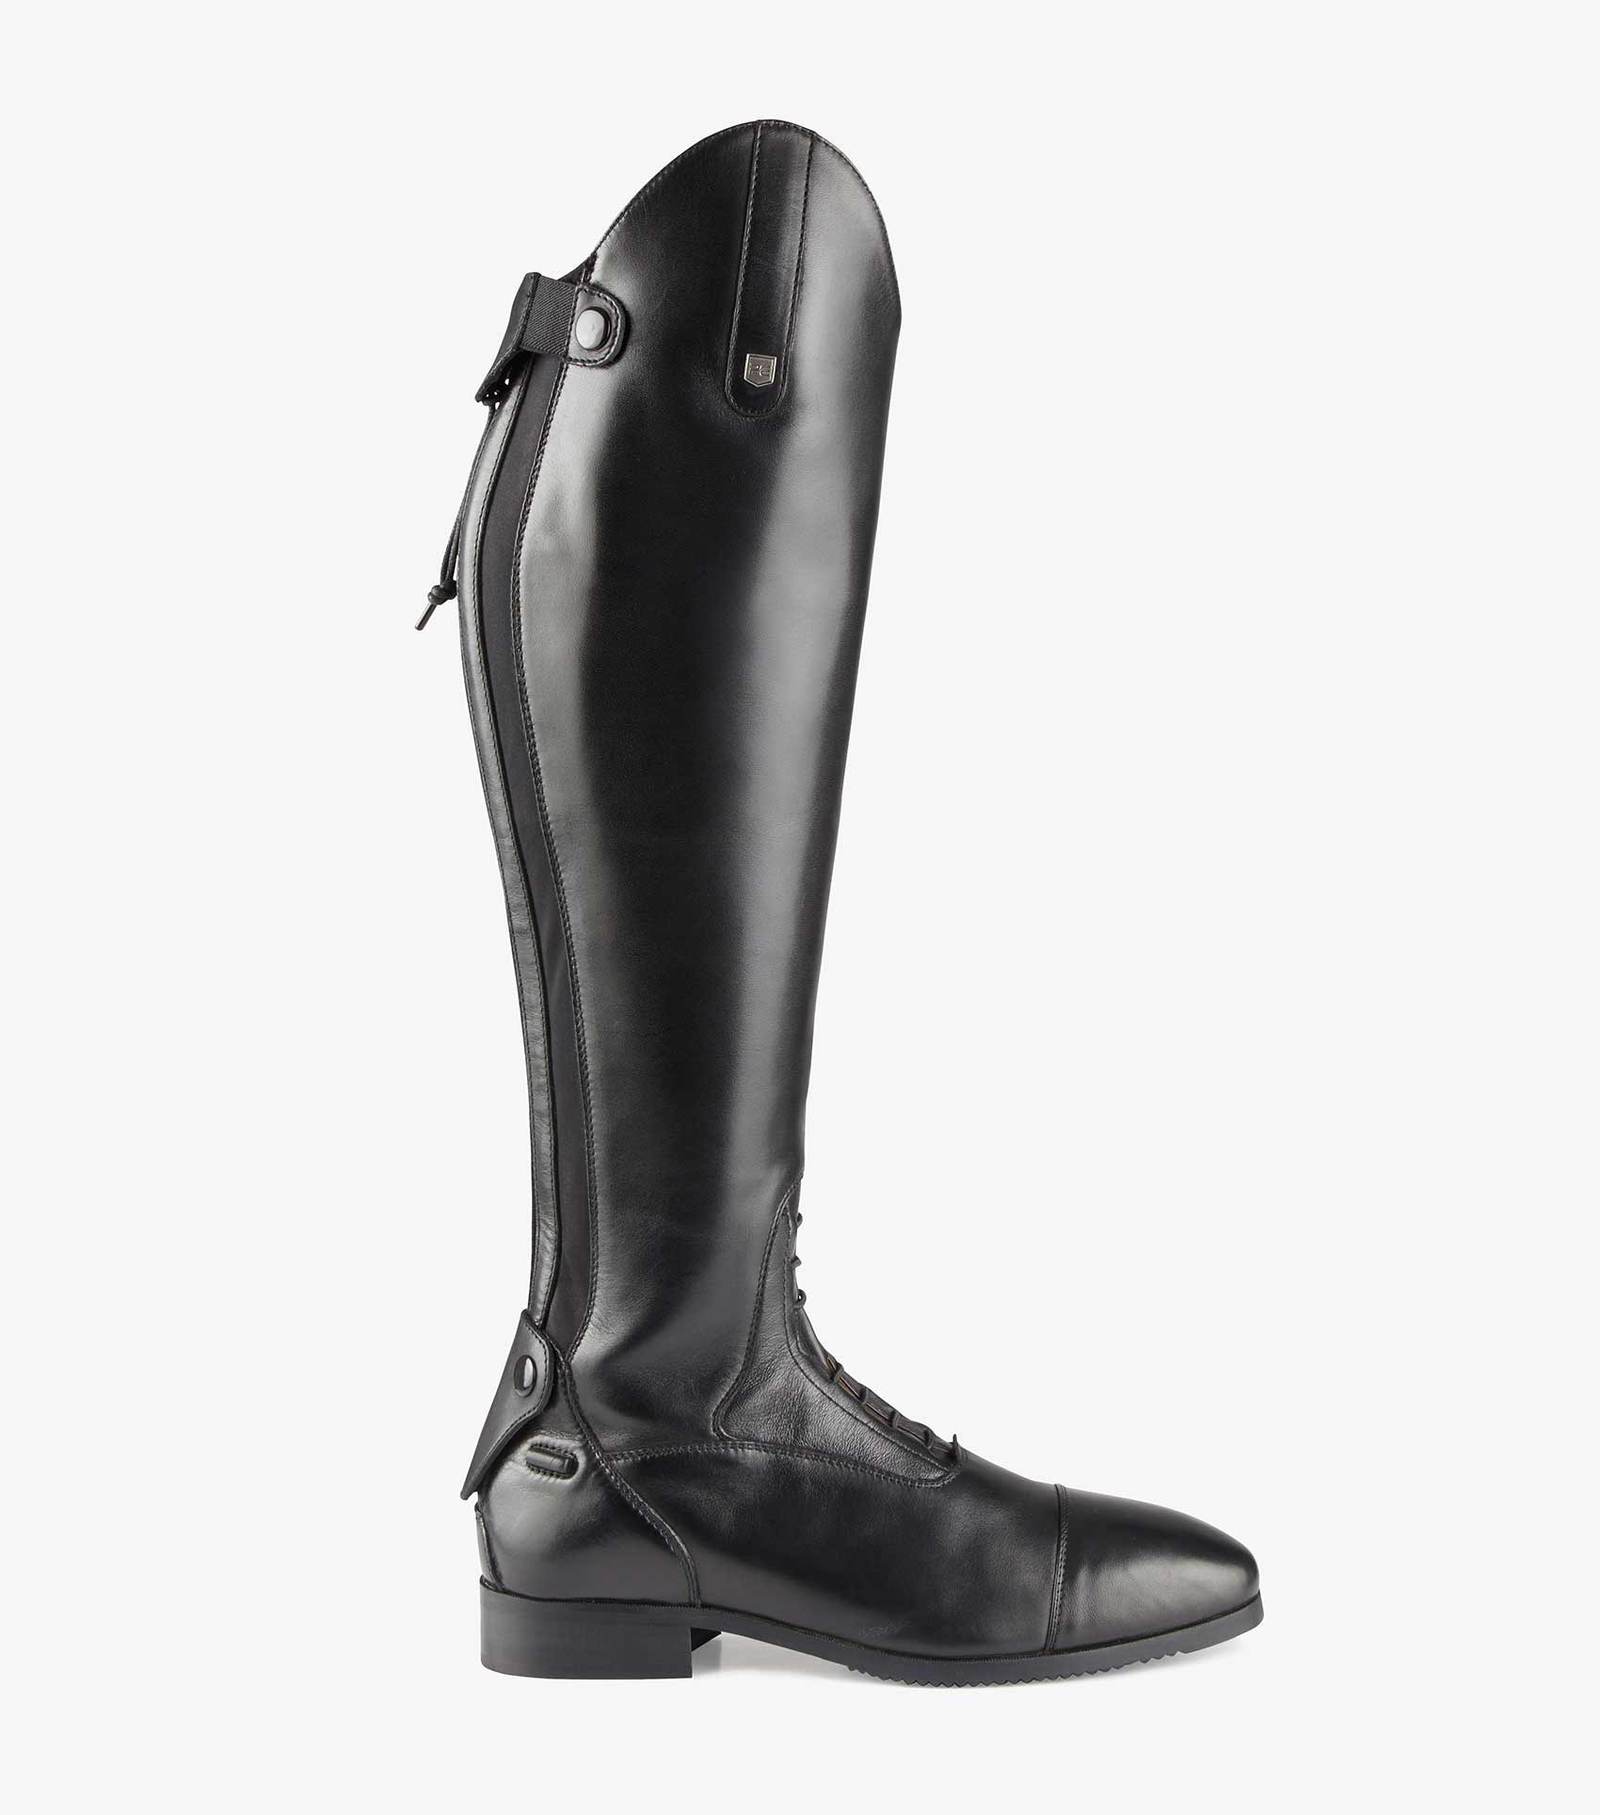 PE - Galileo Men's Long Leather Field Riding Boots – Essential ...